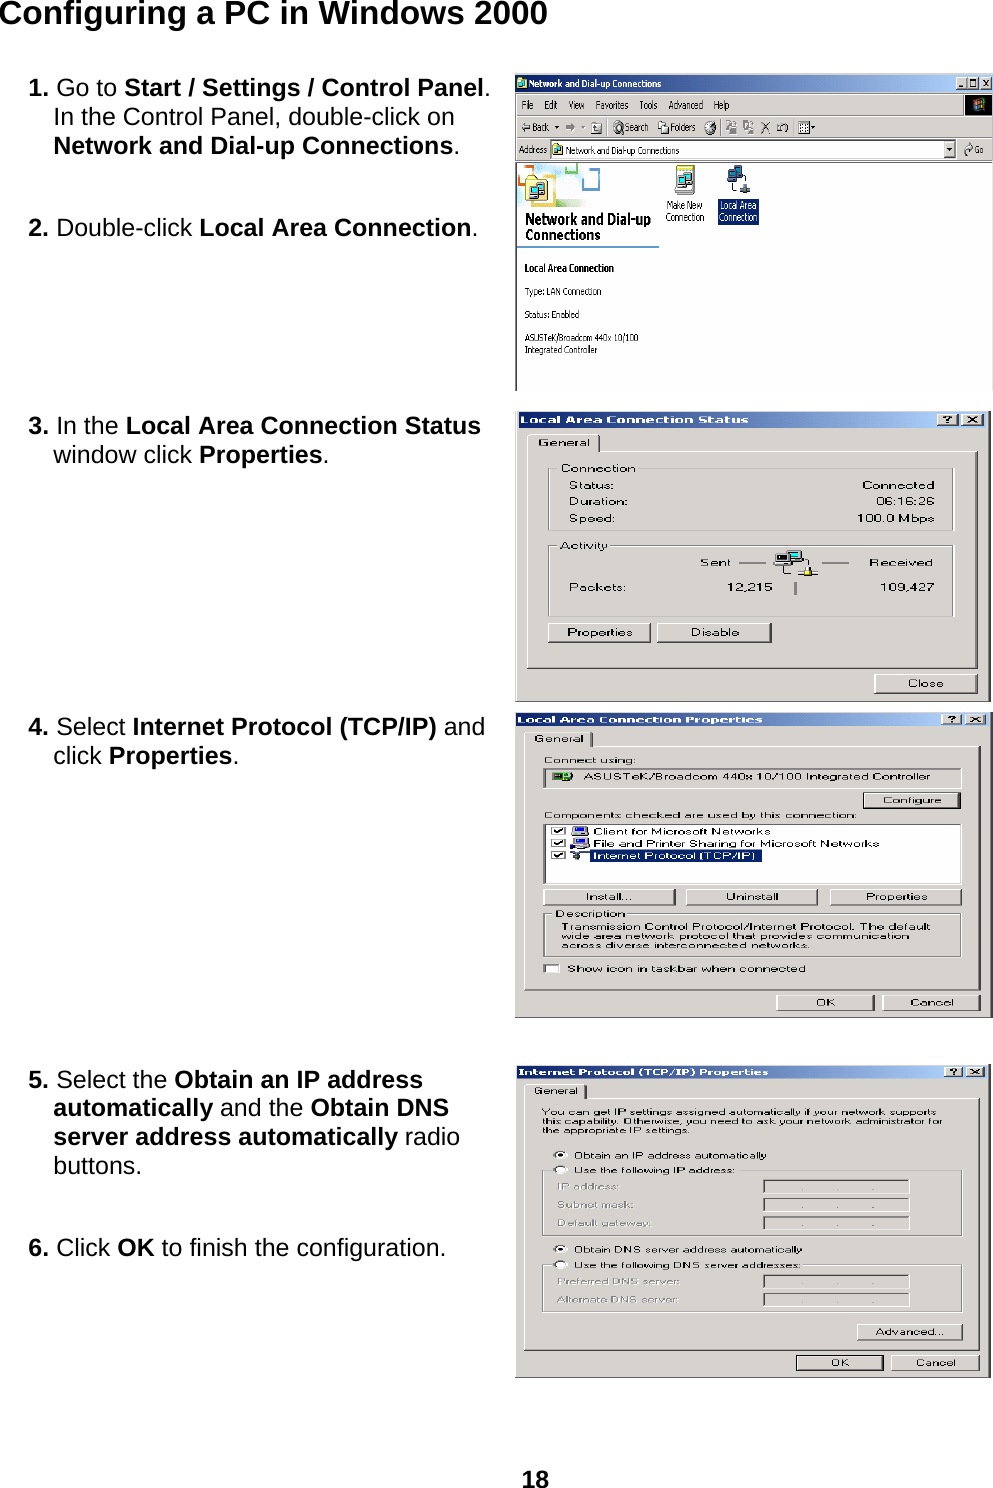  18 Configuring a PC in Windows 2000  1. Go to Start / Settings / Control Panel. In the Control Panel, double-click on Network and Dial-up Connections.  2. Double-click Local Area Connection.  3. In the Local Area Connection Status window click Properties.  4. Select Internet Protocol (TCP/IP) and click Properties.  5. Select the Obtain an IP address automatically and the Obtain DNS server address automatically radio buttons.  6. Click OK to finish the configuration.    